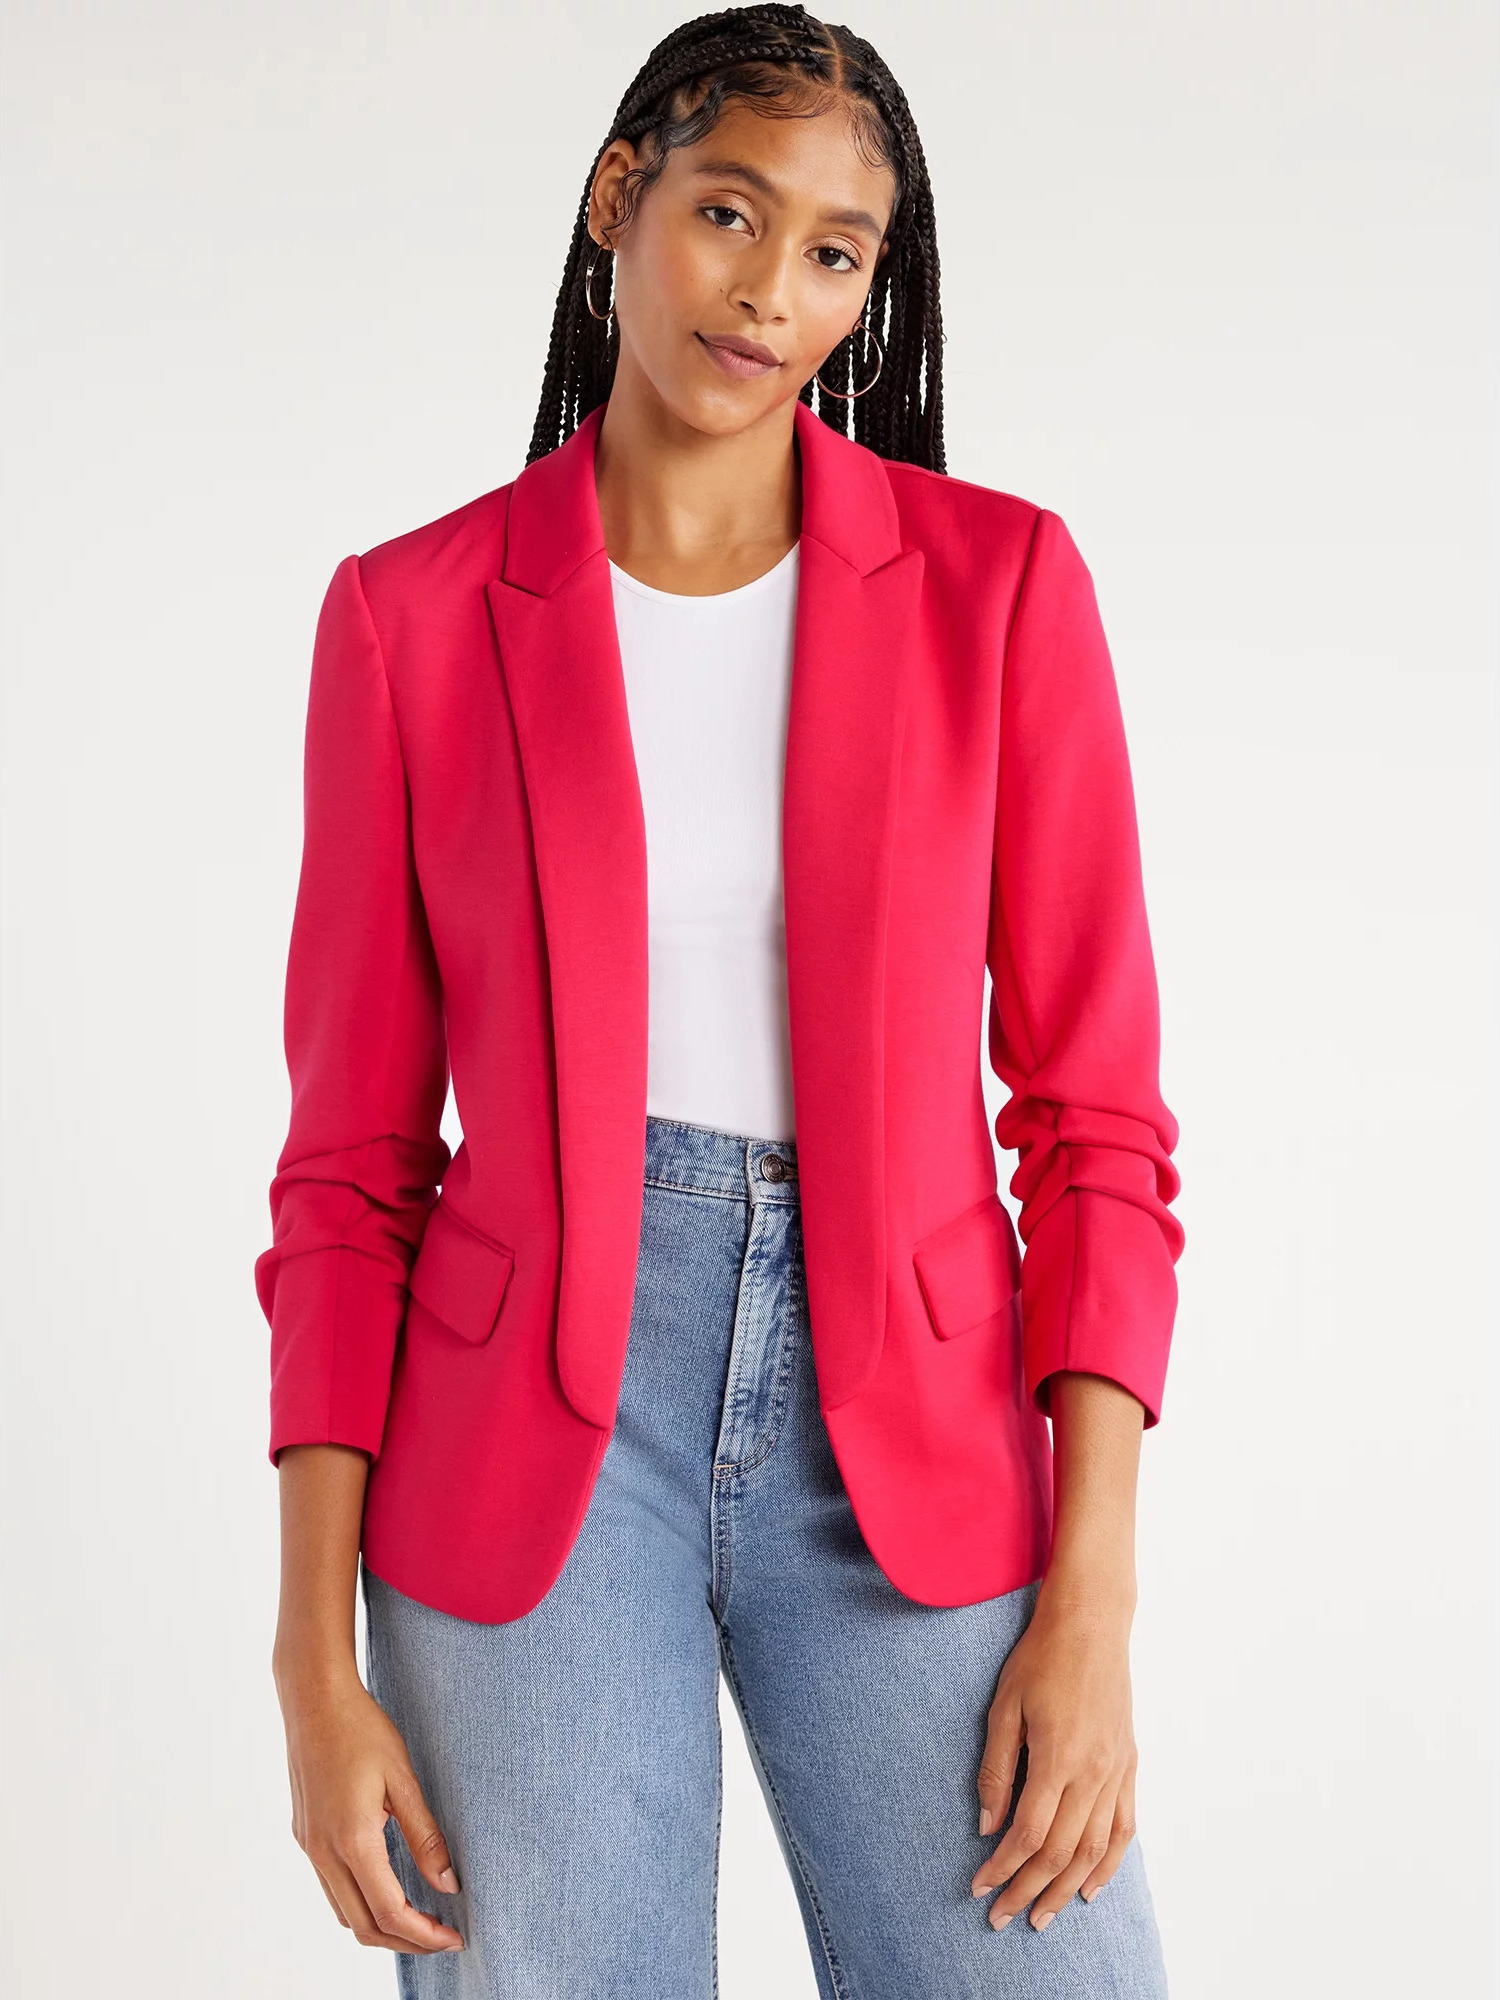 A model wearing the scrunched-sleeve blazer in pinkish red over a white tee and blue jeans